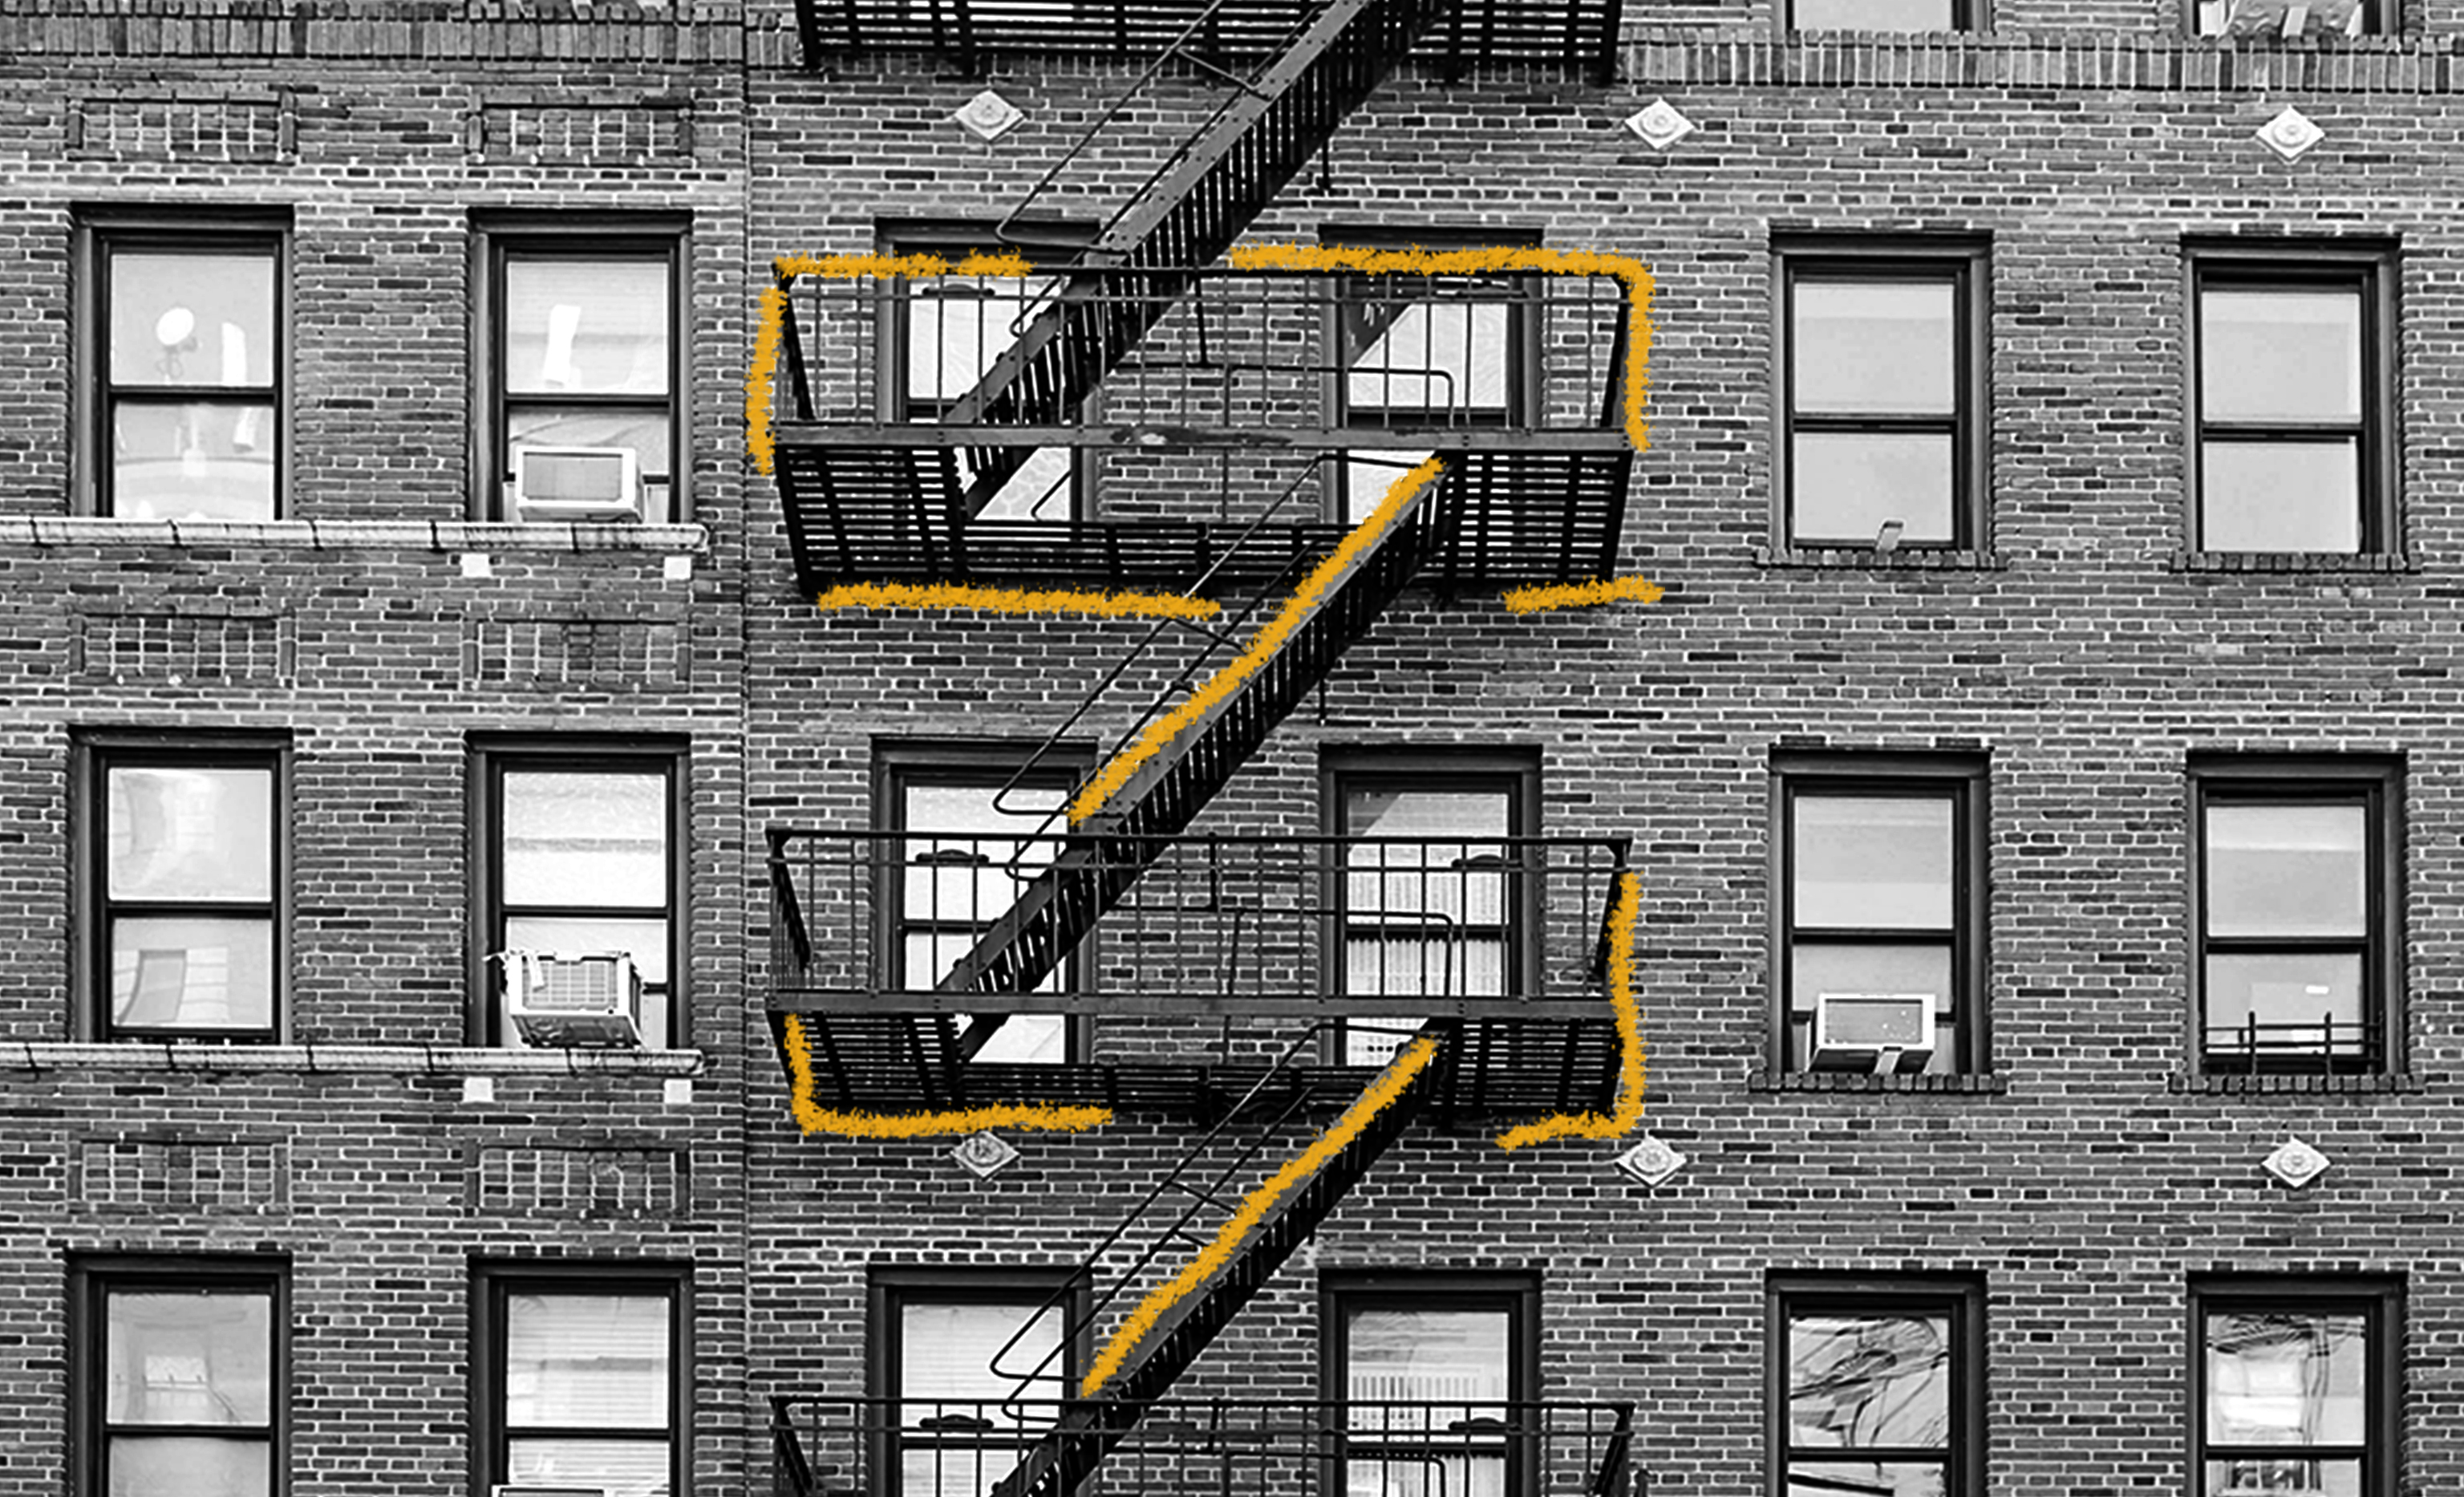 The History of the Fire Escape